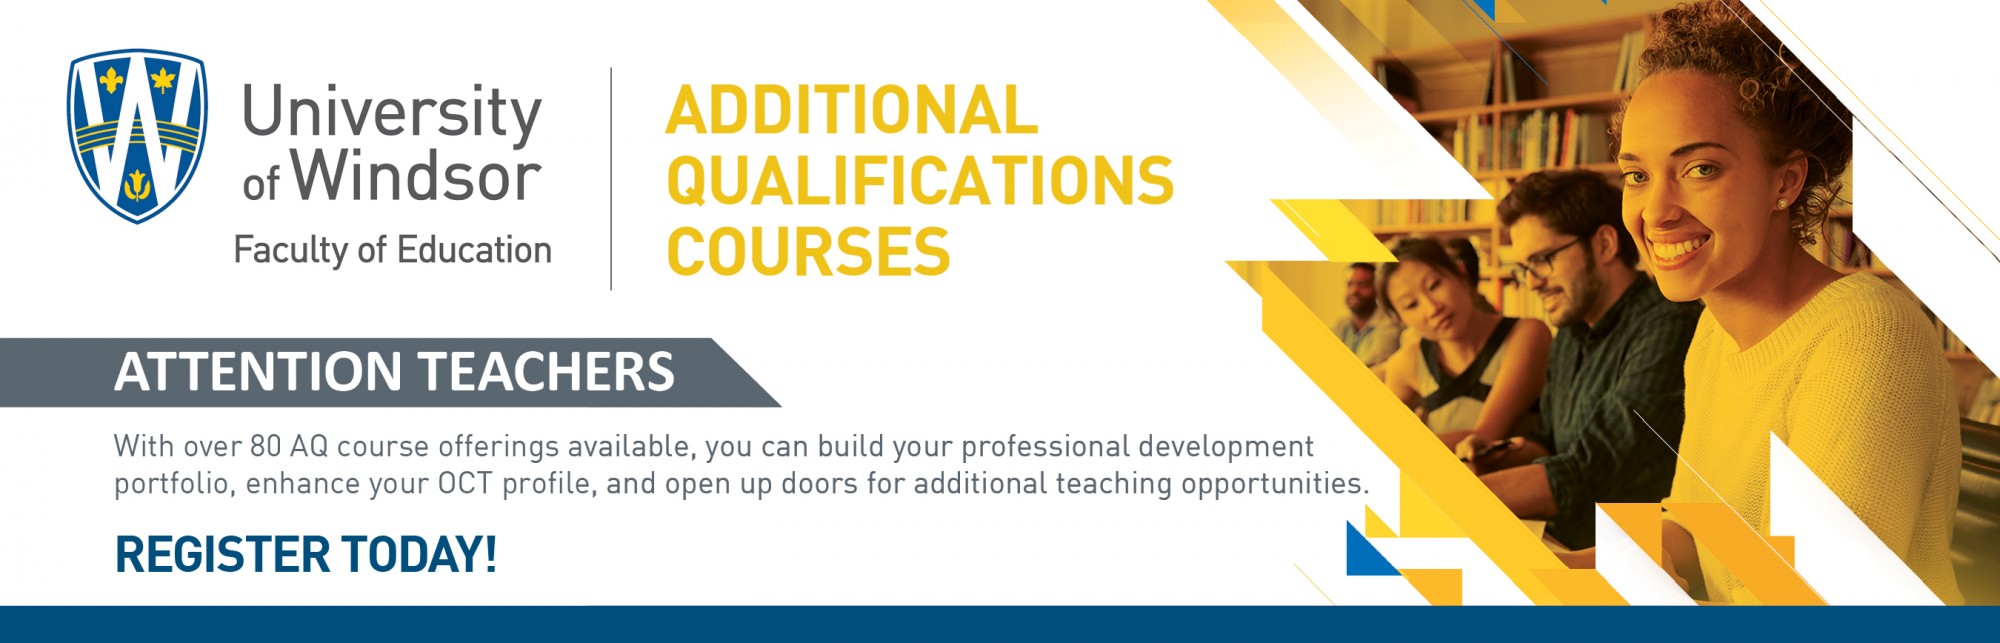 Additional Qualifications courses, banner ad describing over 80 available courses for professional development.